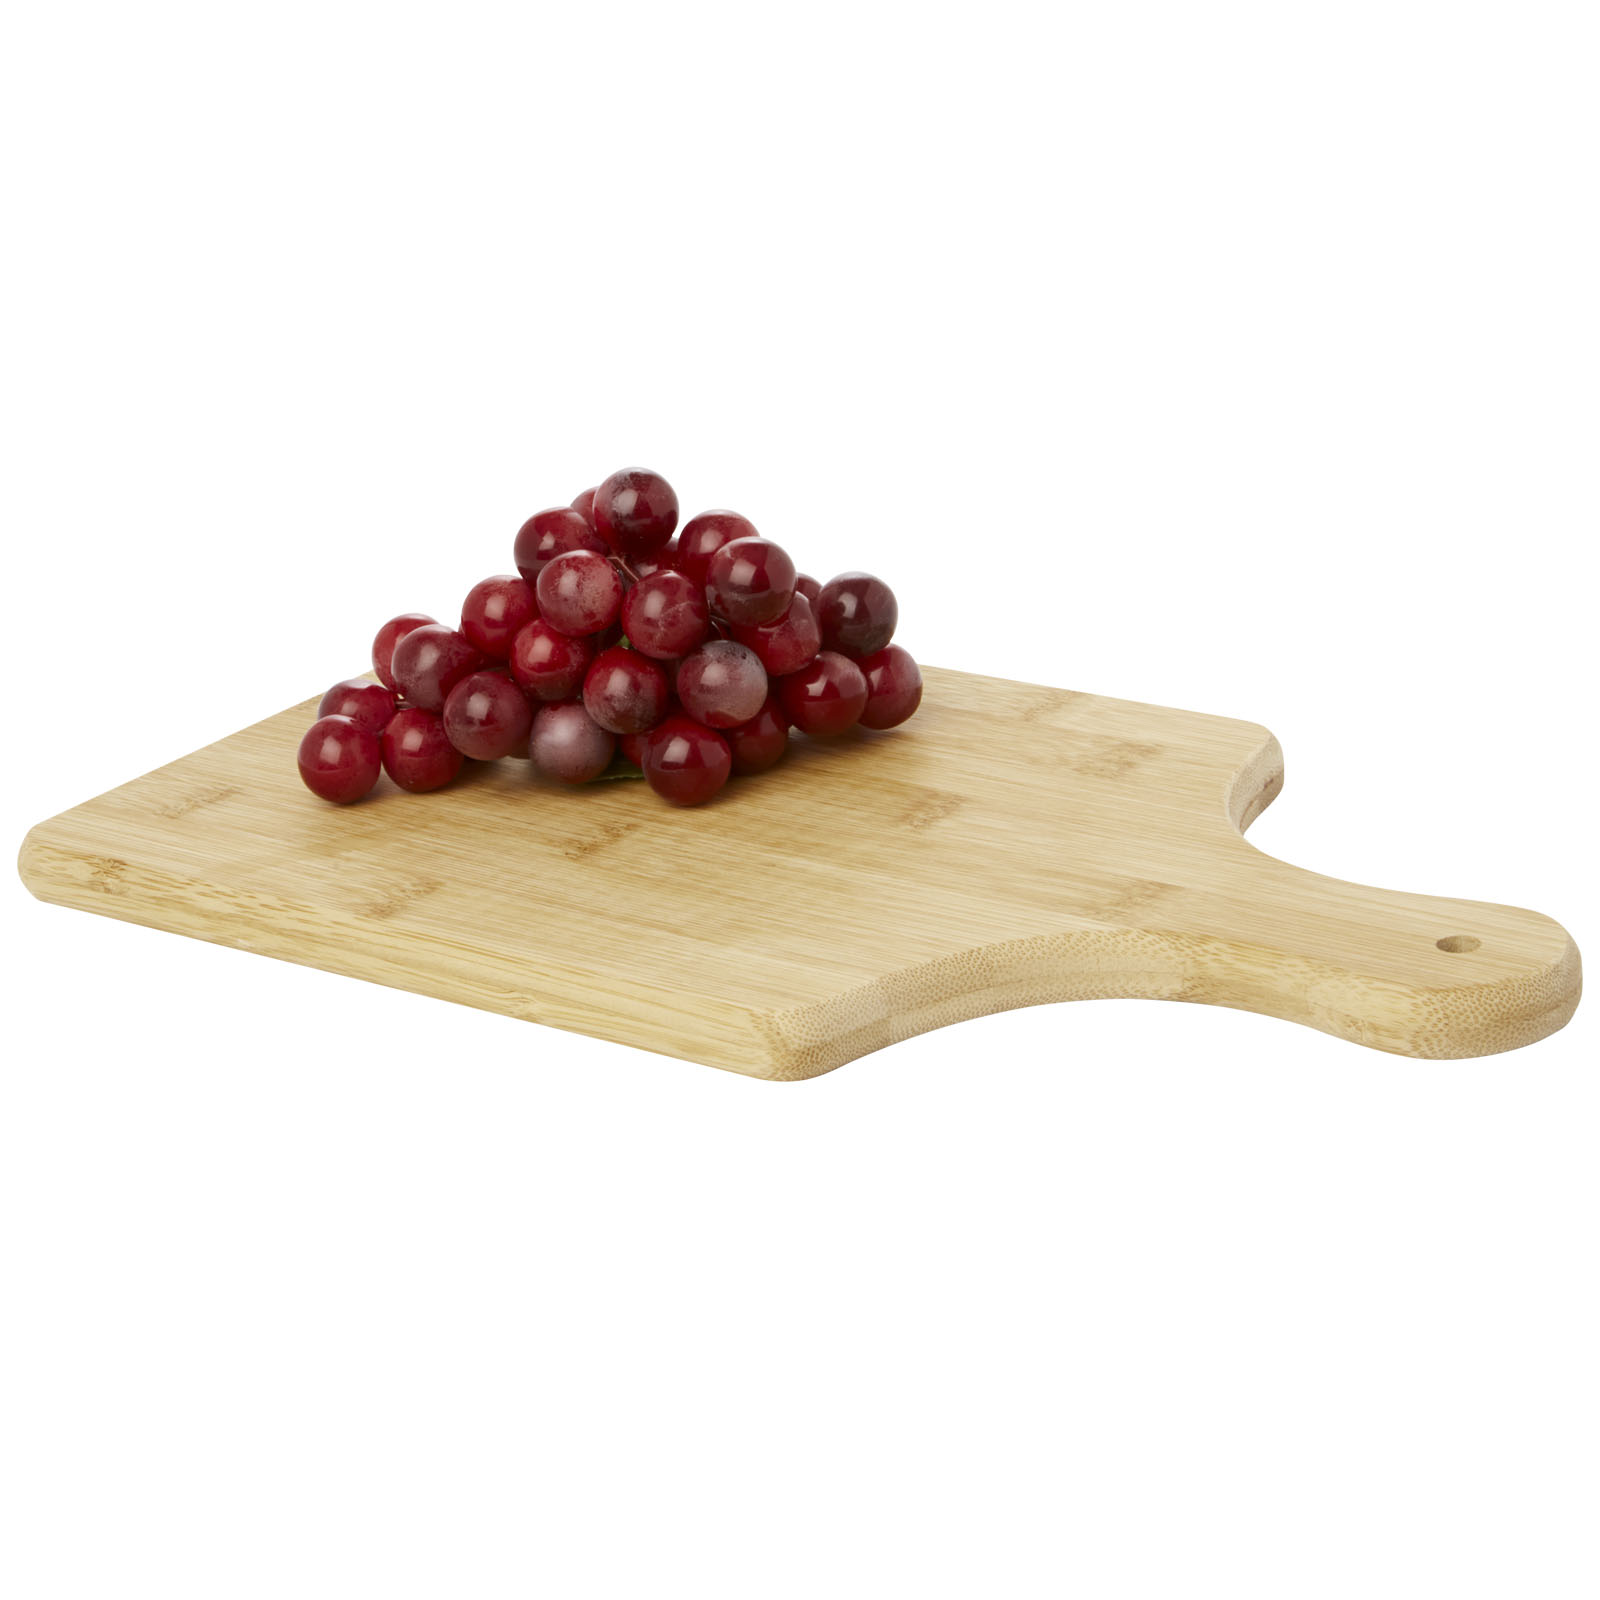 Advertising Cutting Boards - Quimet bamboo cutting board